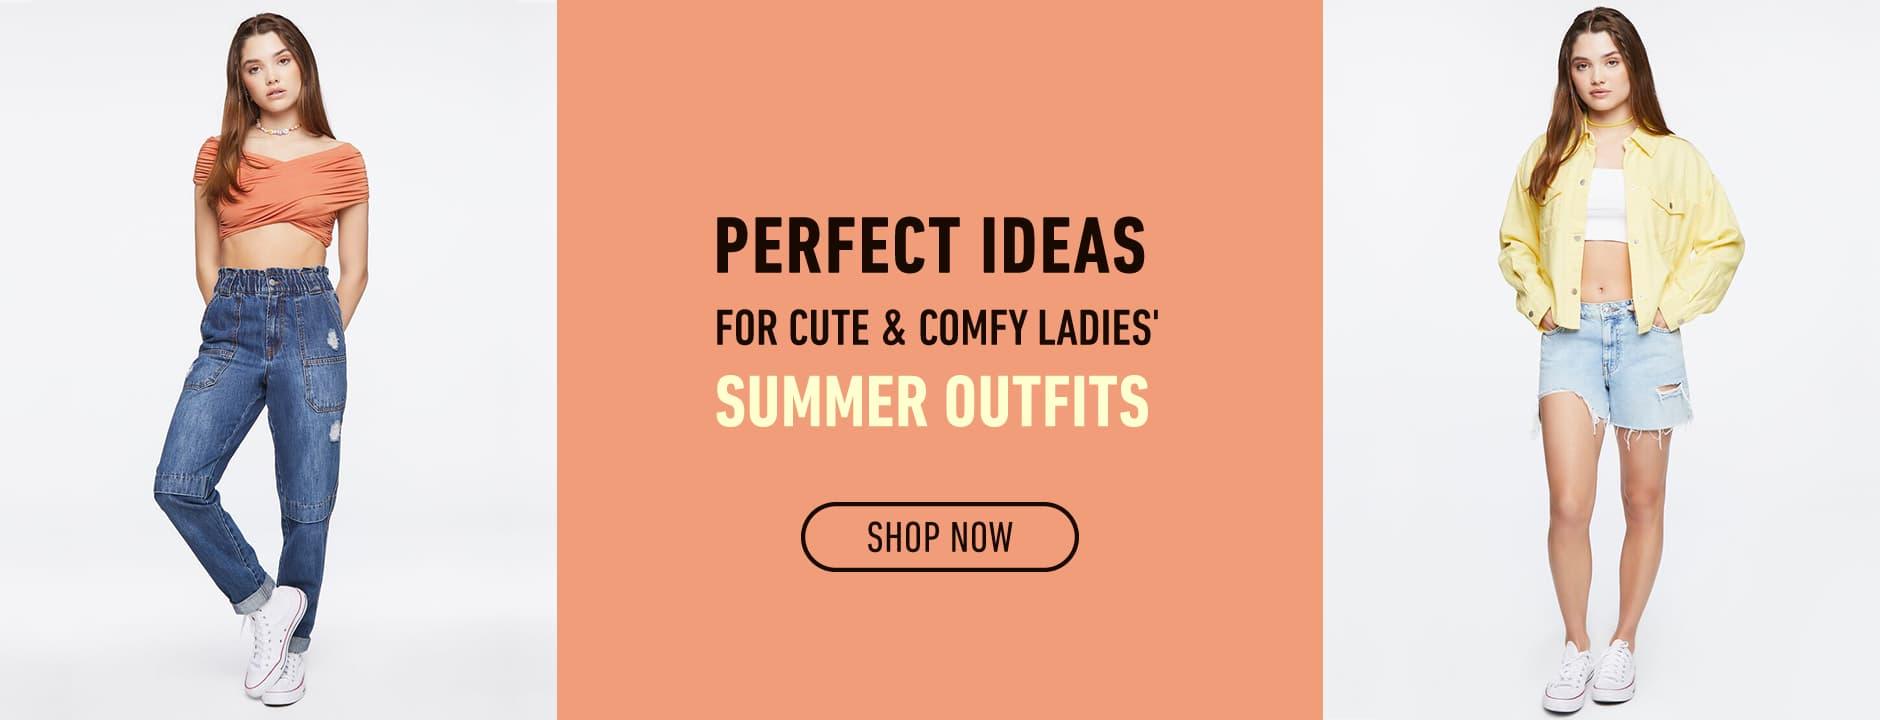 Perfect Ideas for Cute and Comfy Ladies Summer Outfits - Forever 21